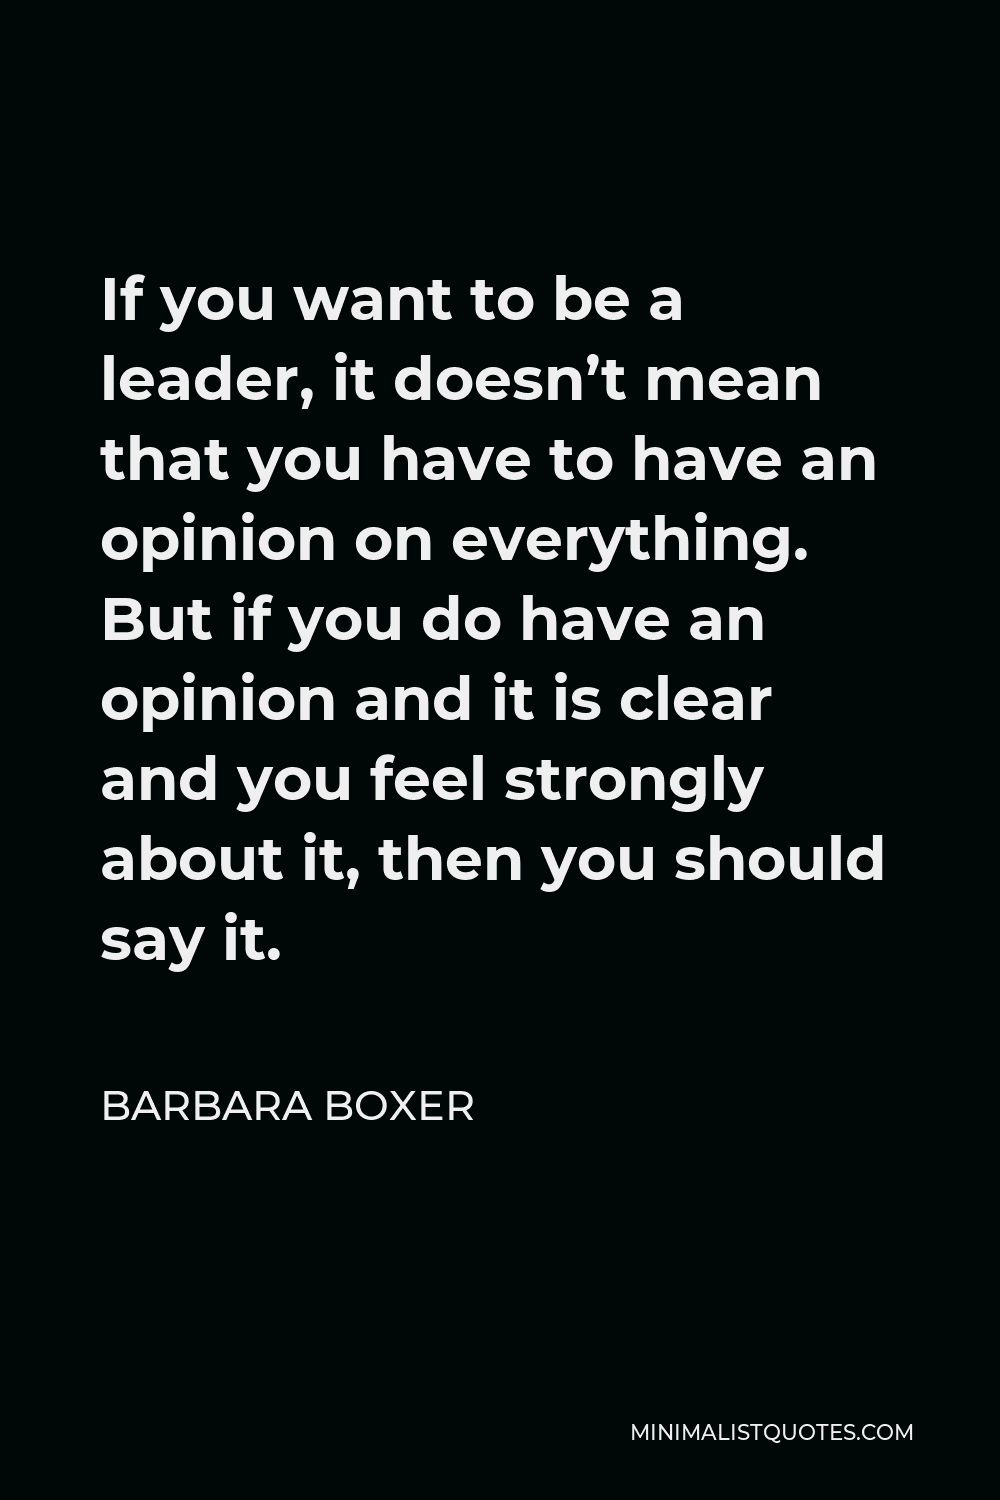 Barbara Boxer Quote - If you want to be a leader, it doesn’t mean that you have to have an opinion on everything. But if you do have an opinion and it is clear and you feel strongly about it, then you should say it.